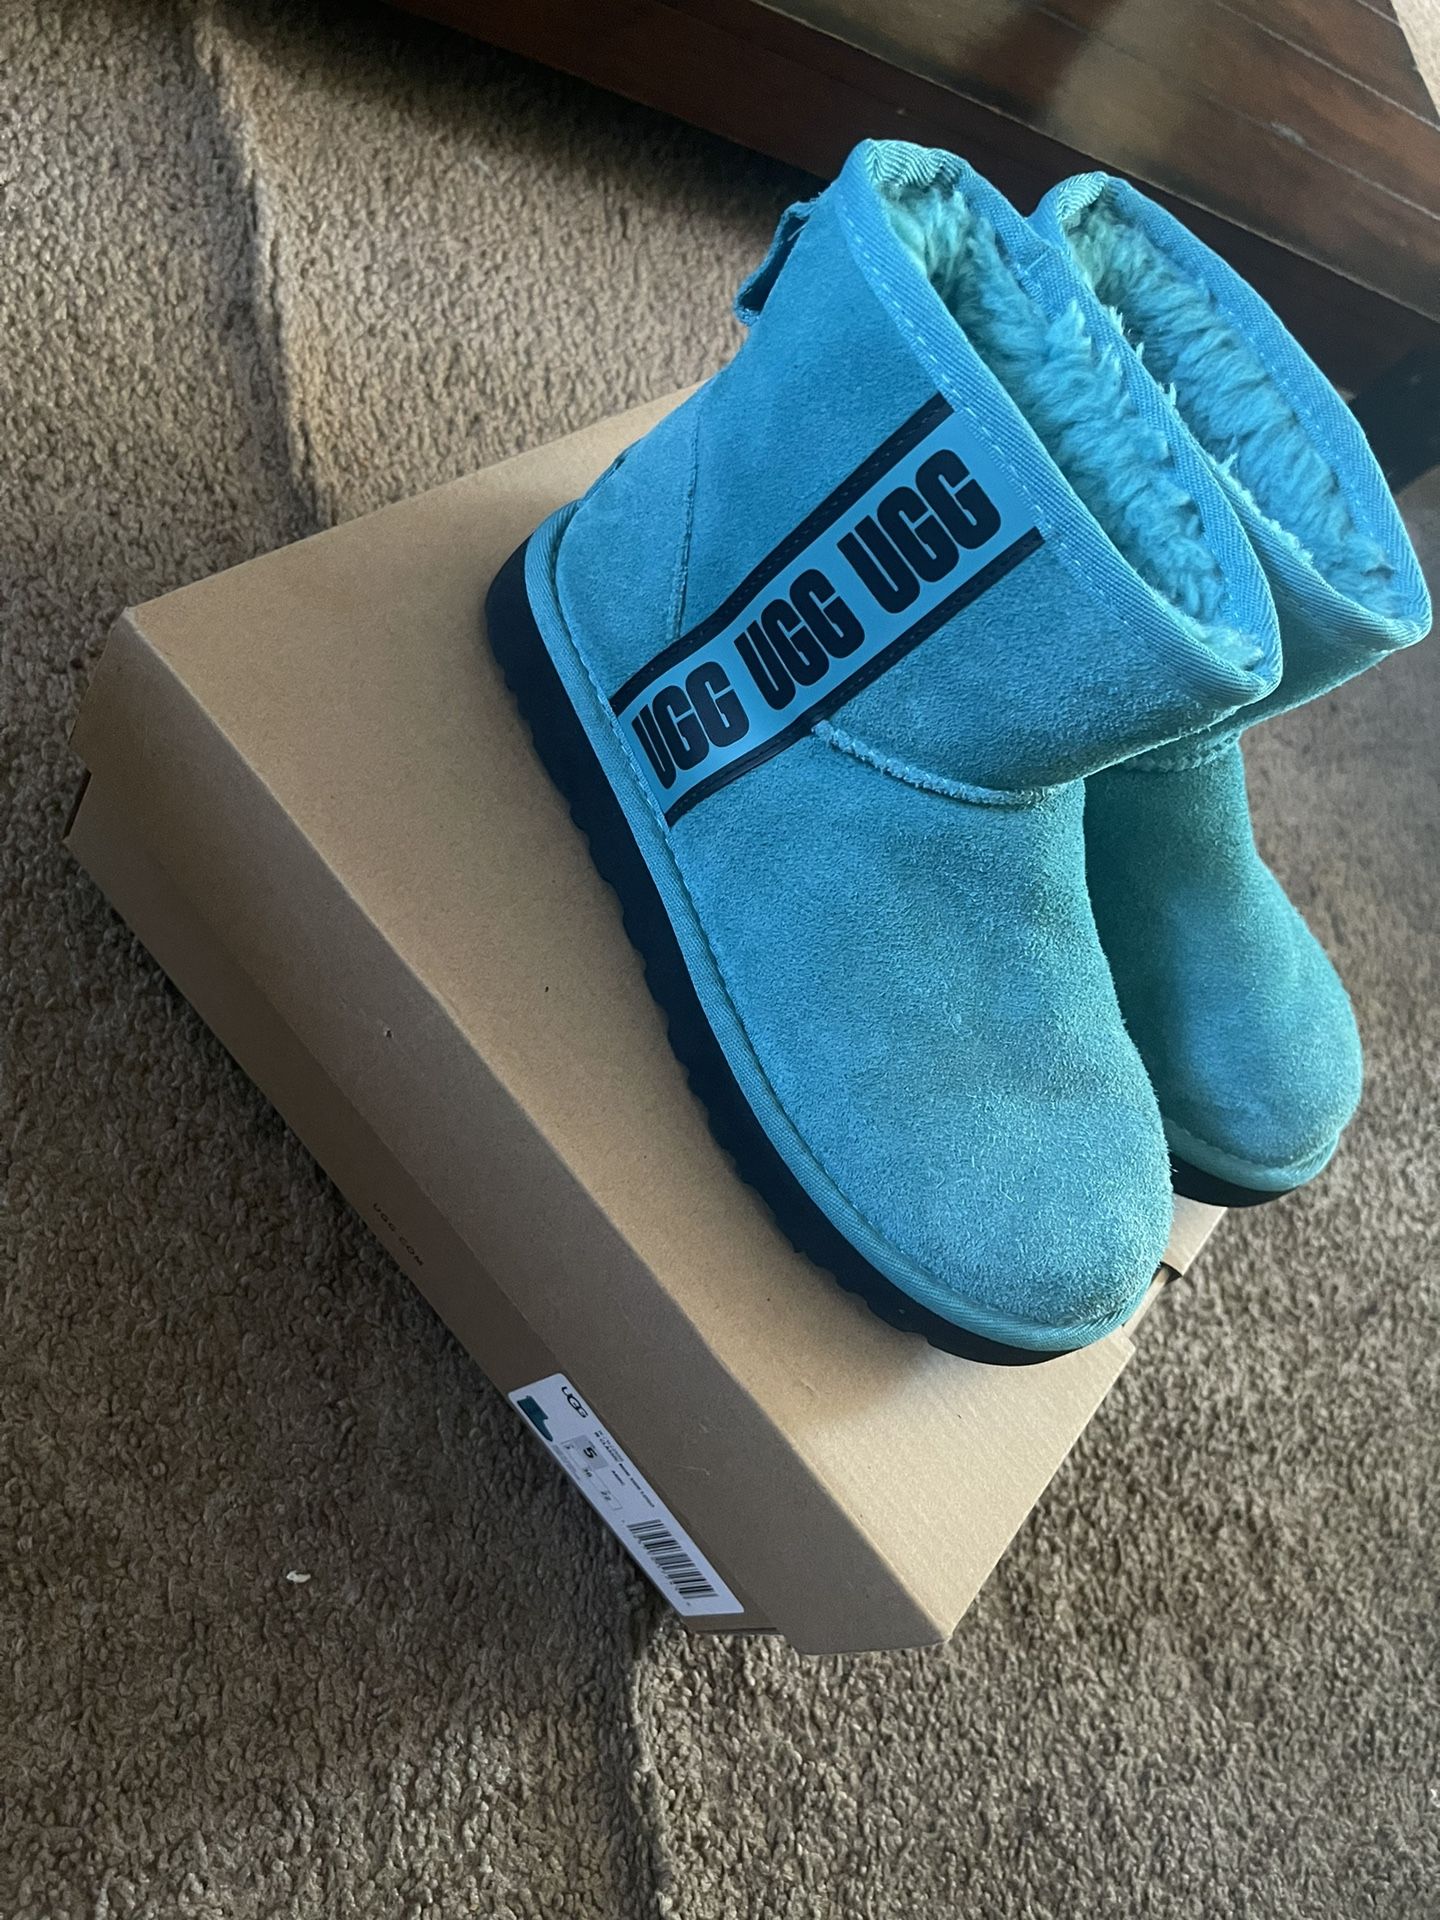 Blue UGG Boots For Women - Size 5